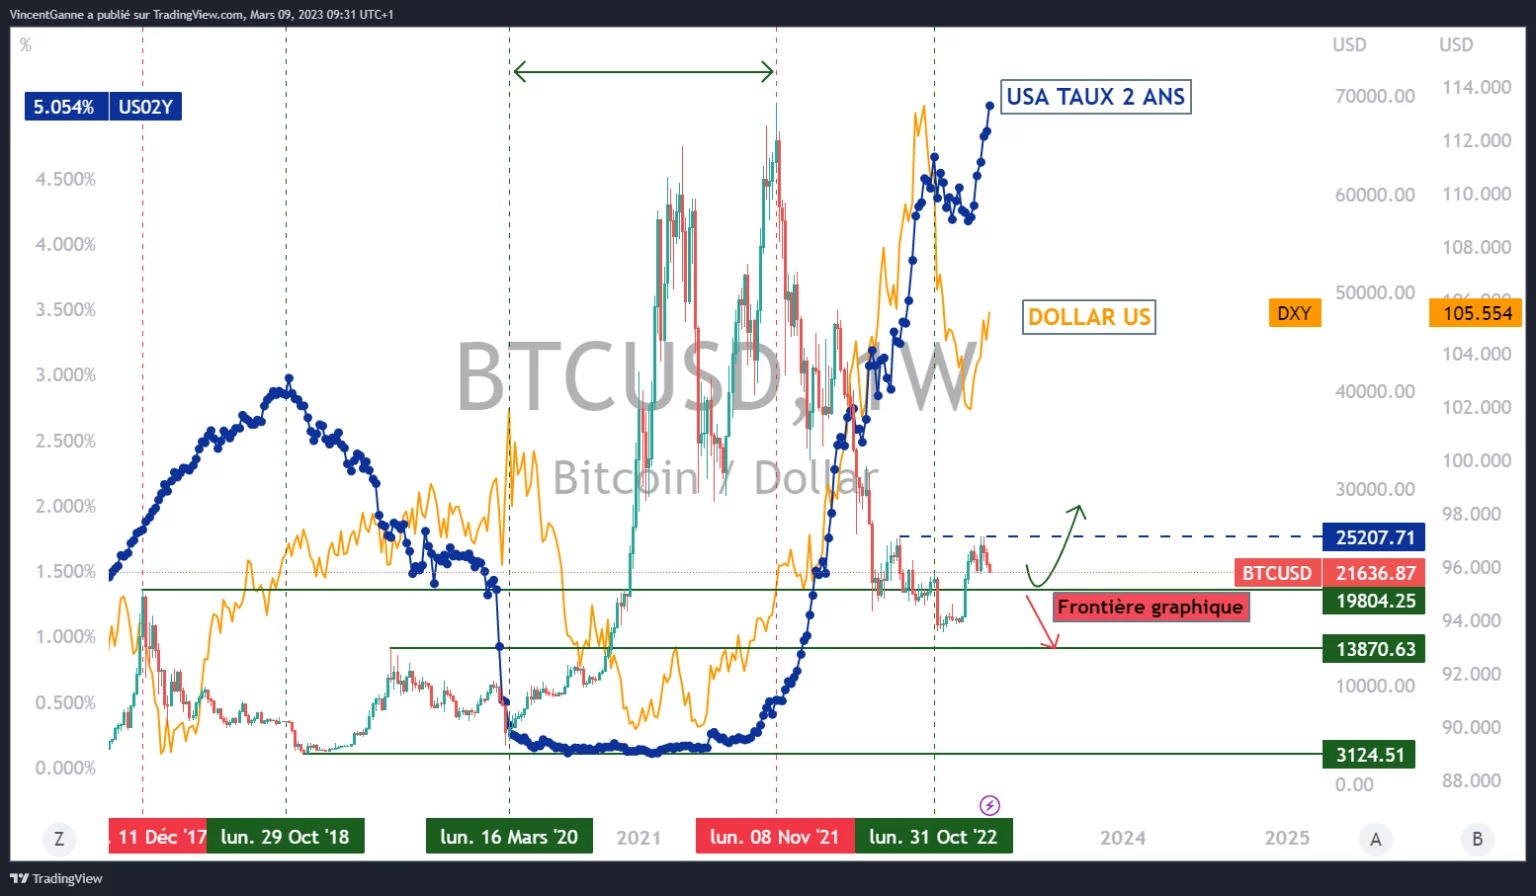 Chart showing weekly Japanese candlestick bitcoin price with arithmetic price scale